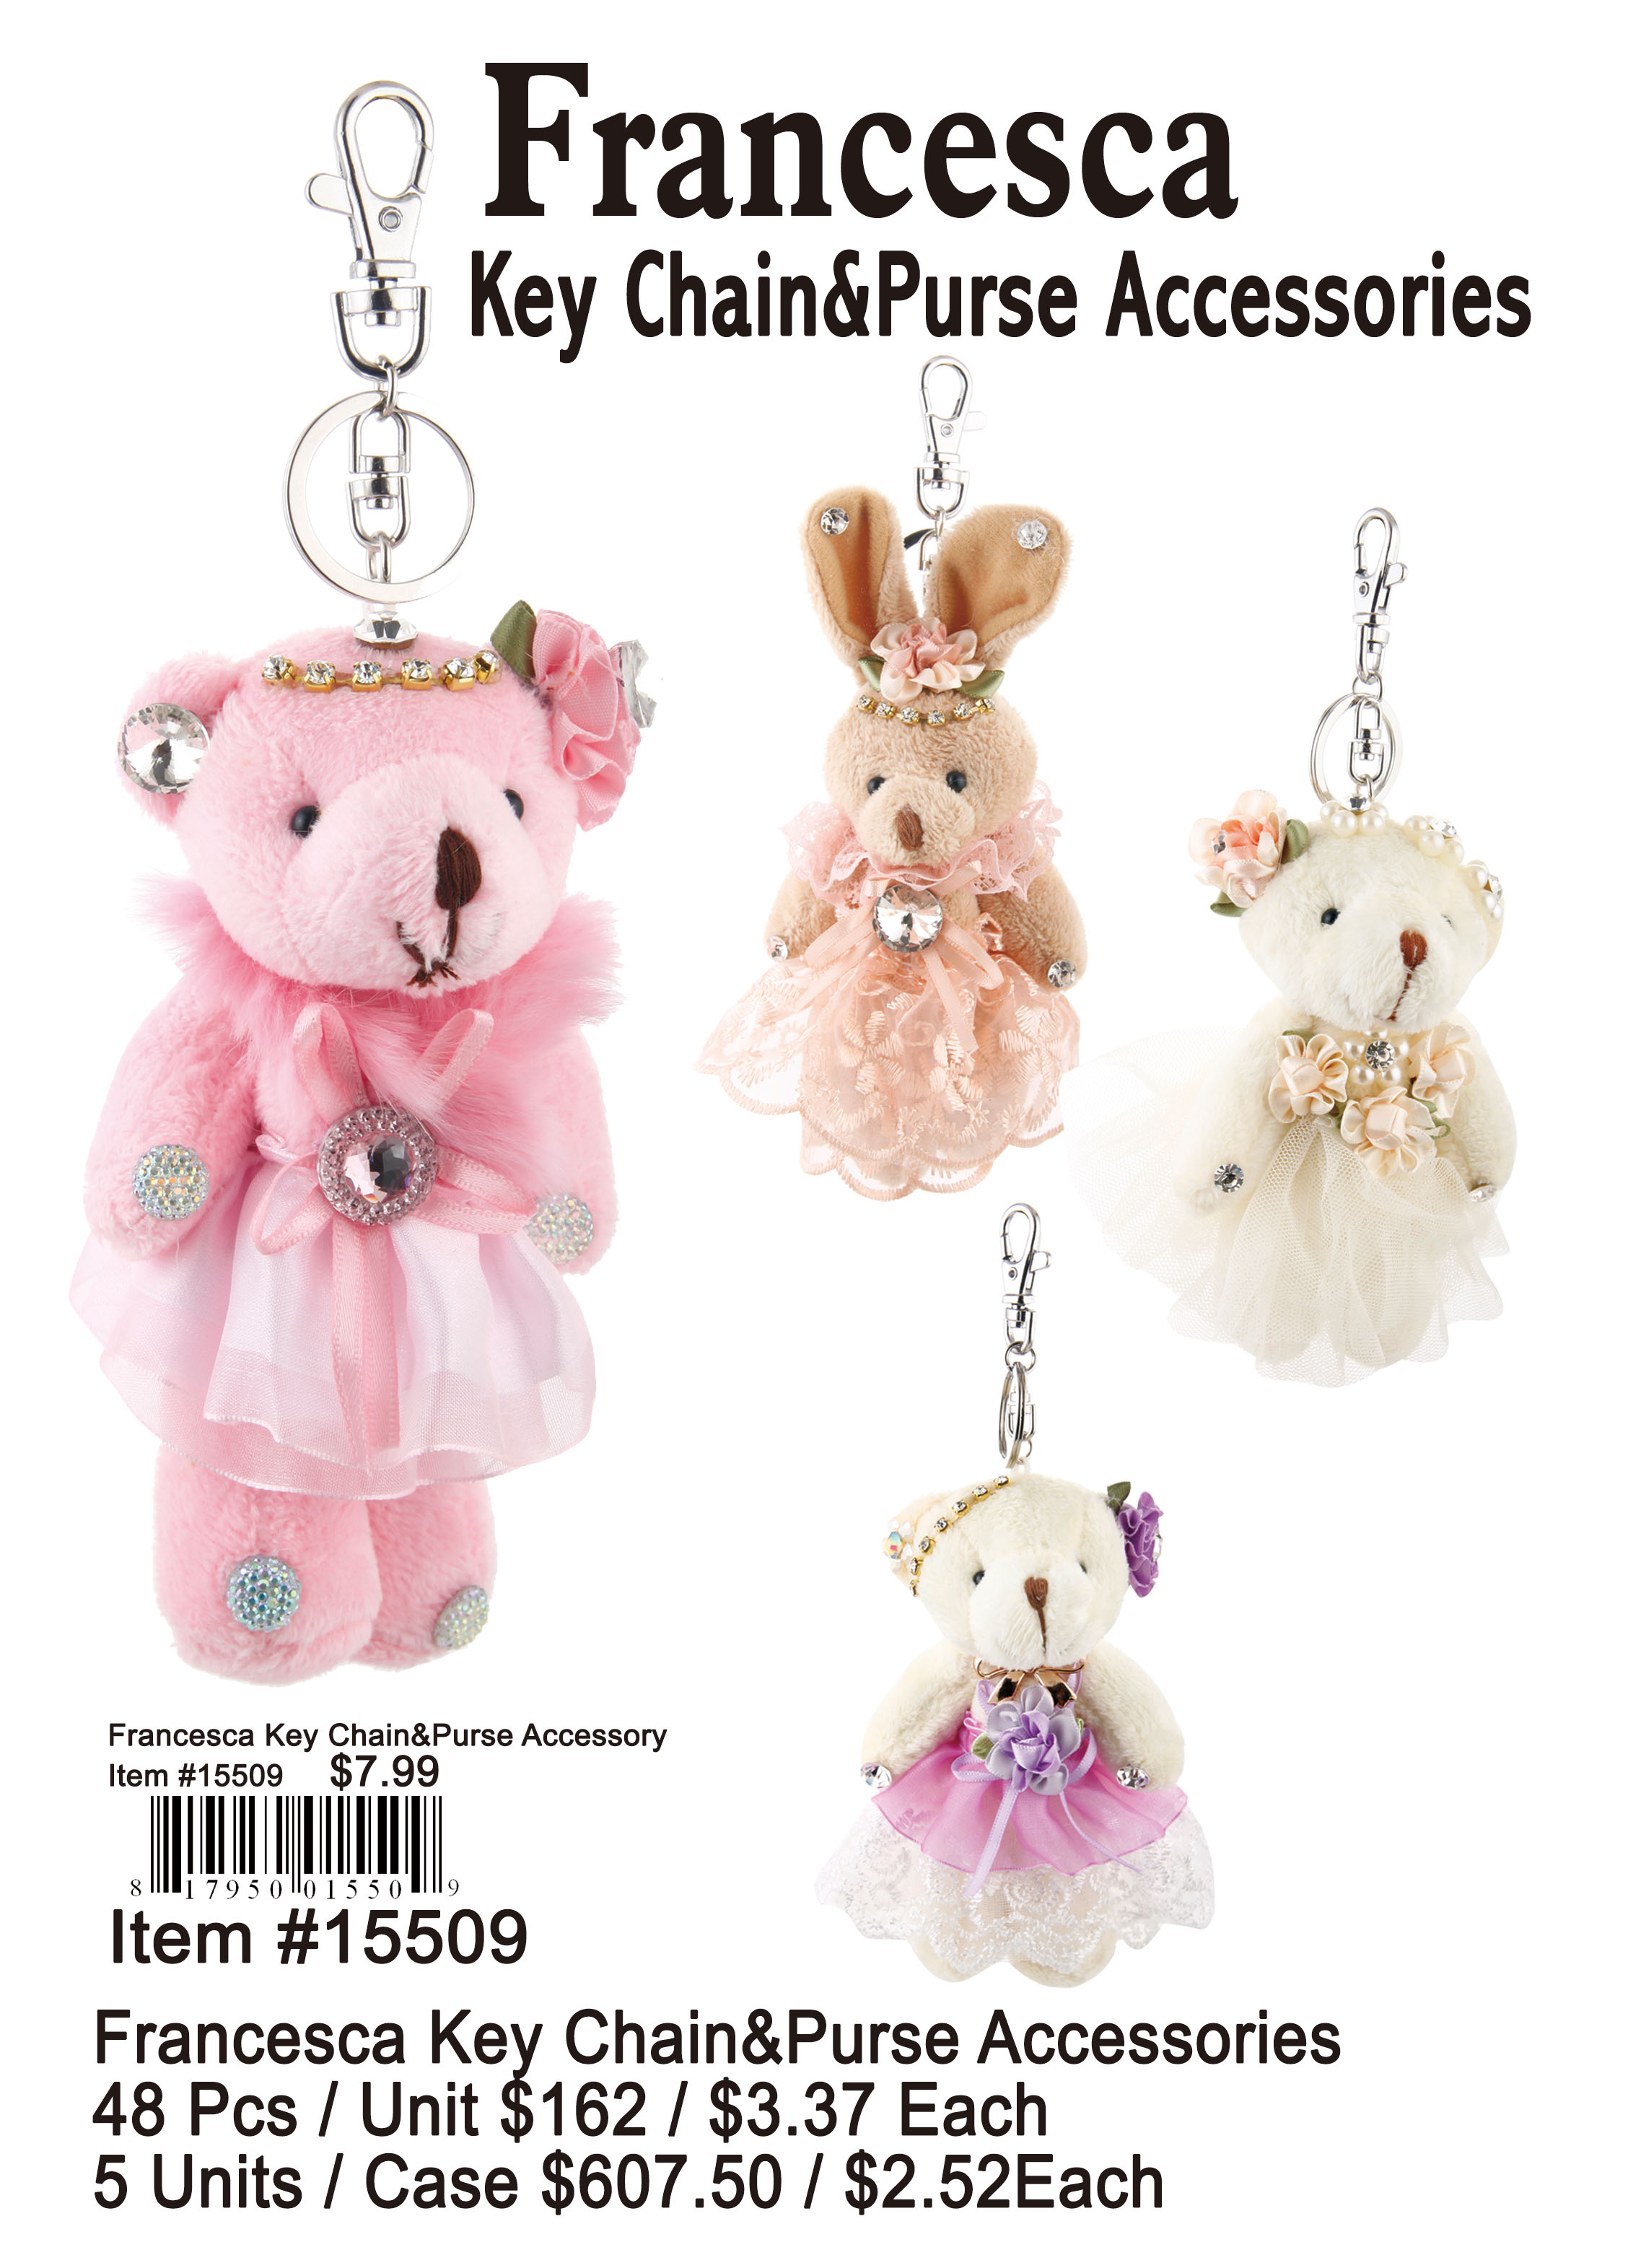 Francesca Keychain and Purse Accessories